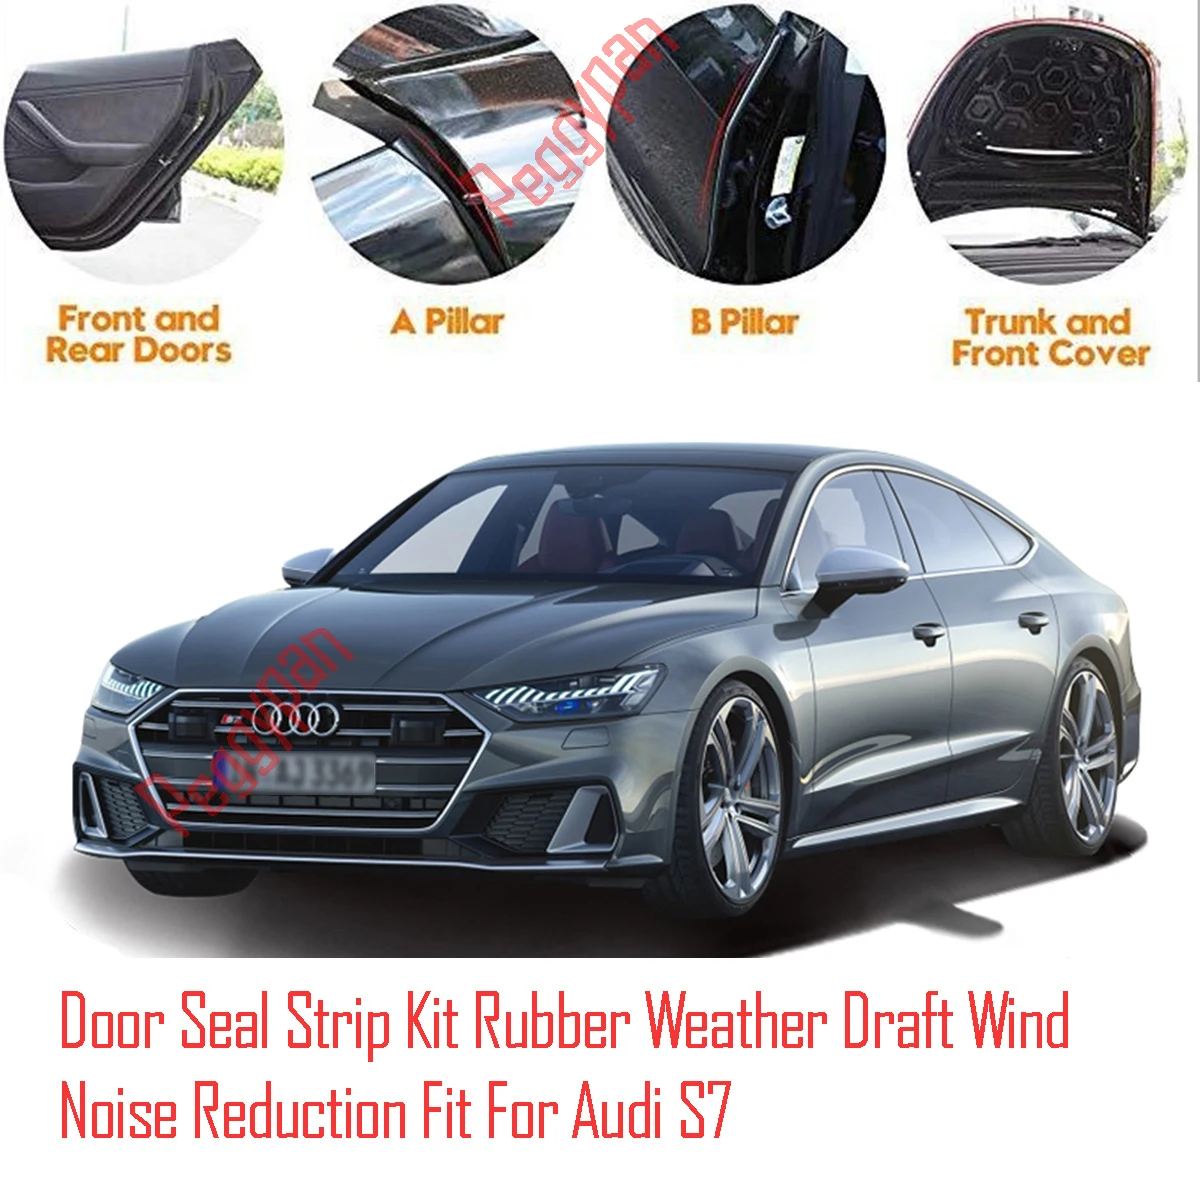 Door Seal Strip Kit Self Adhesive Window Engine Cover Soundproof Rubber Weather Draft Wind Noise Reduction Fit For Audi S7